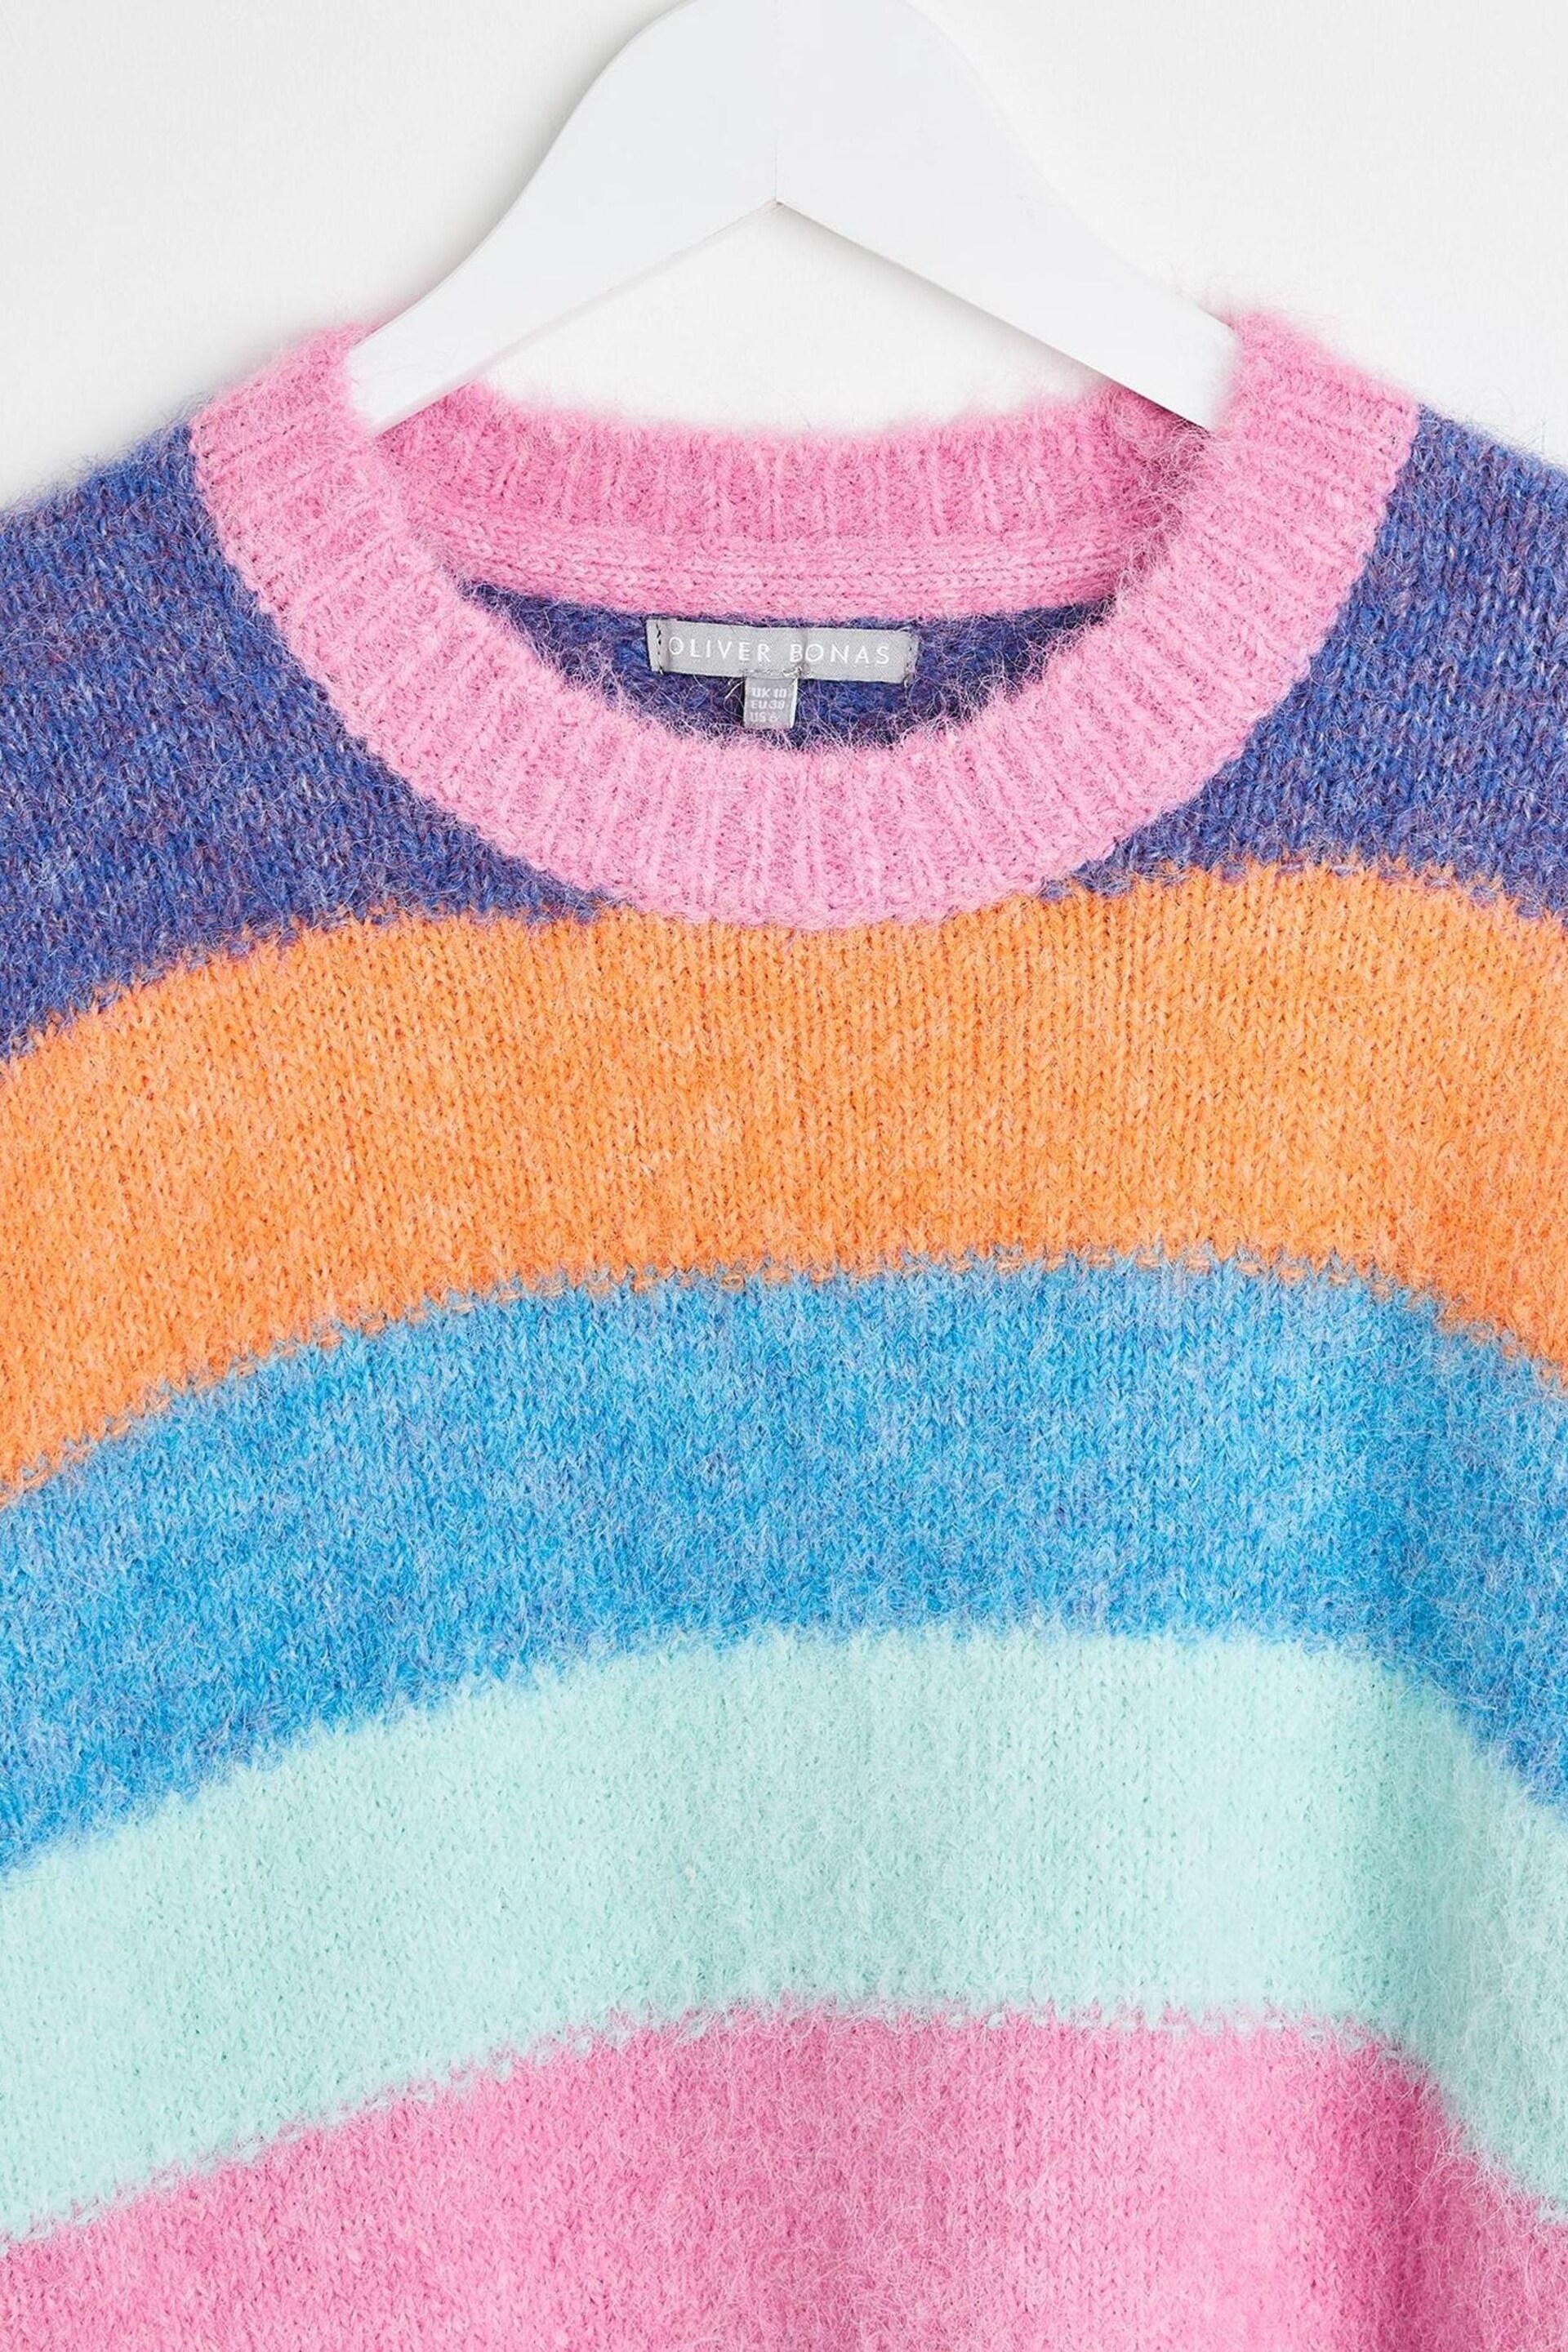 Oliver Bonas Pink Fluffy Rainbow Knitted Jumper - Image 6 of 8